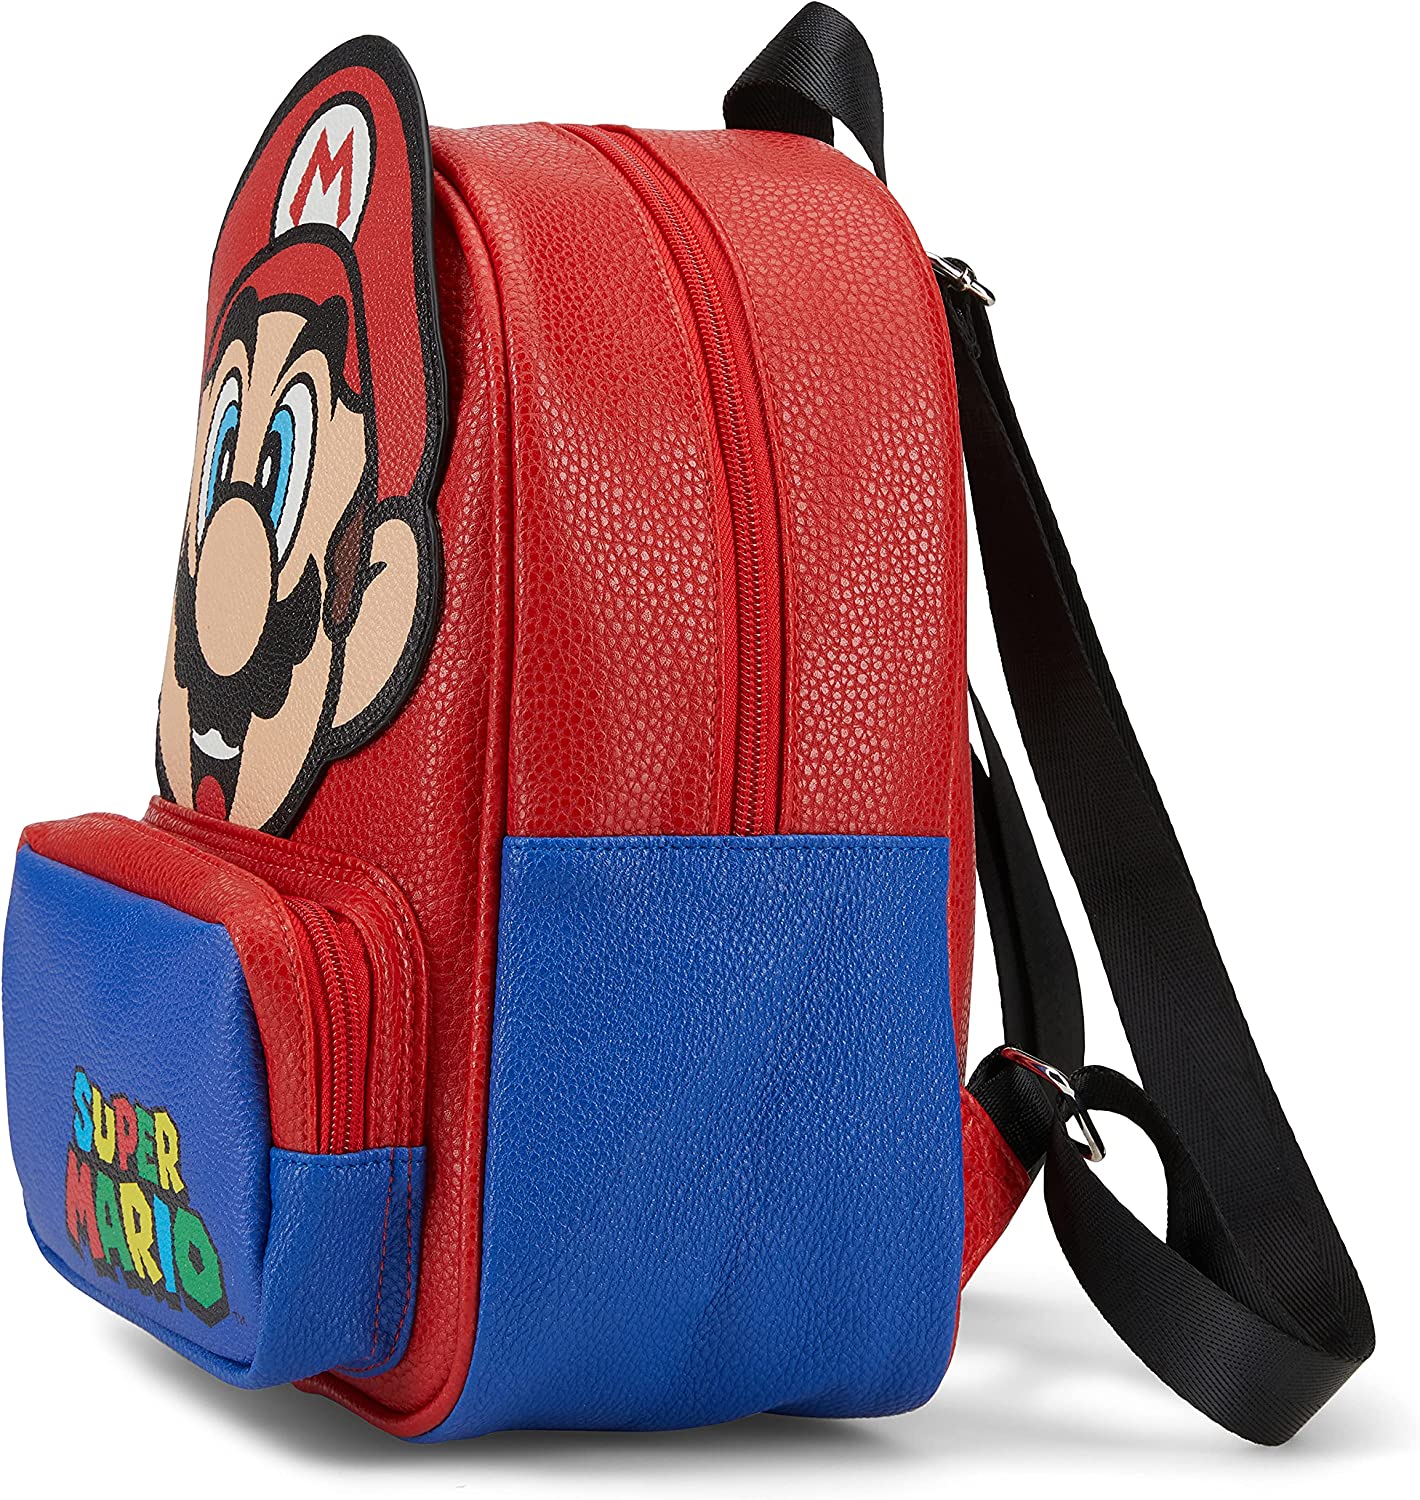 Nintendo's Super Mario Cosplay 10.5 Backpack, Faux Leather PU with 3D Features, Red & Blue - image 5 of 6